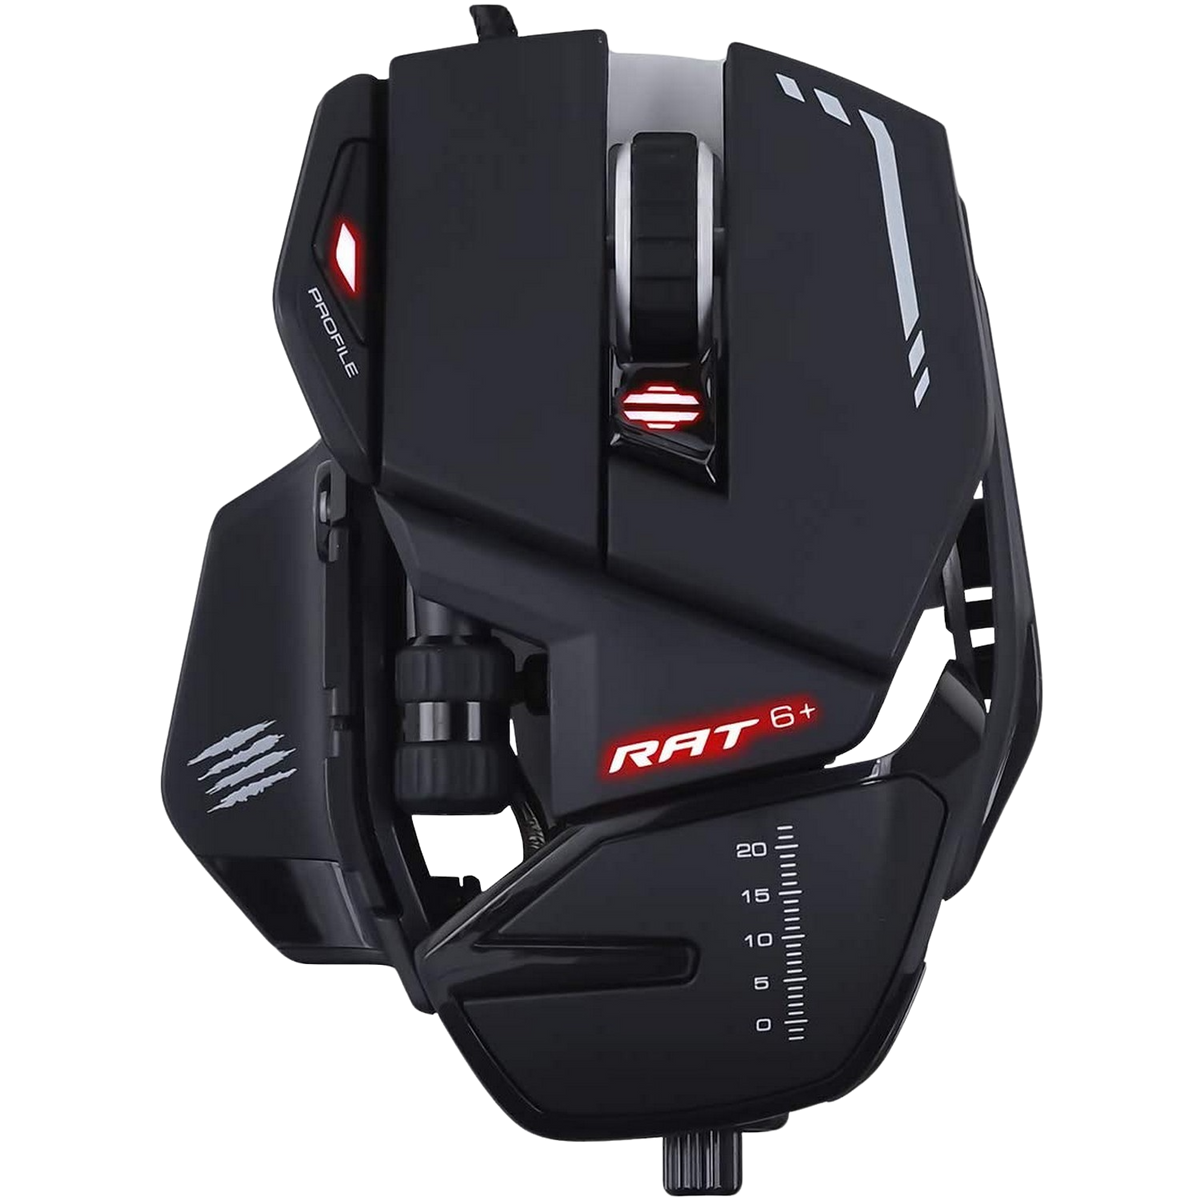 MAD CATZ MR04DCINBL000-0 Schwarz MOUSE, Gaming OPTICAL R.A.T. GAMING Maus, BL 6